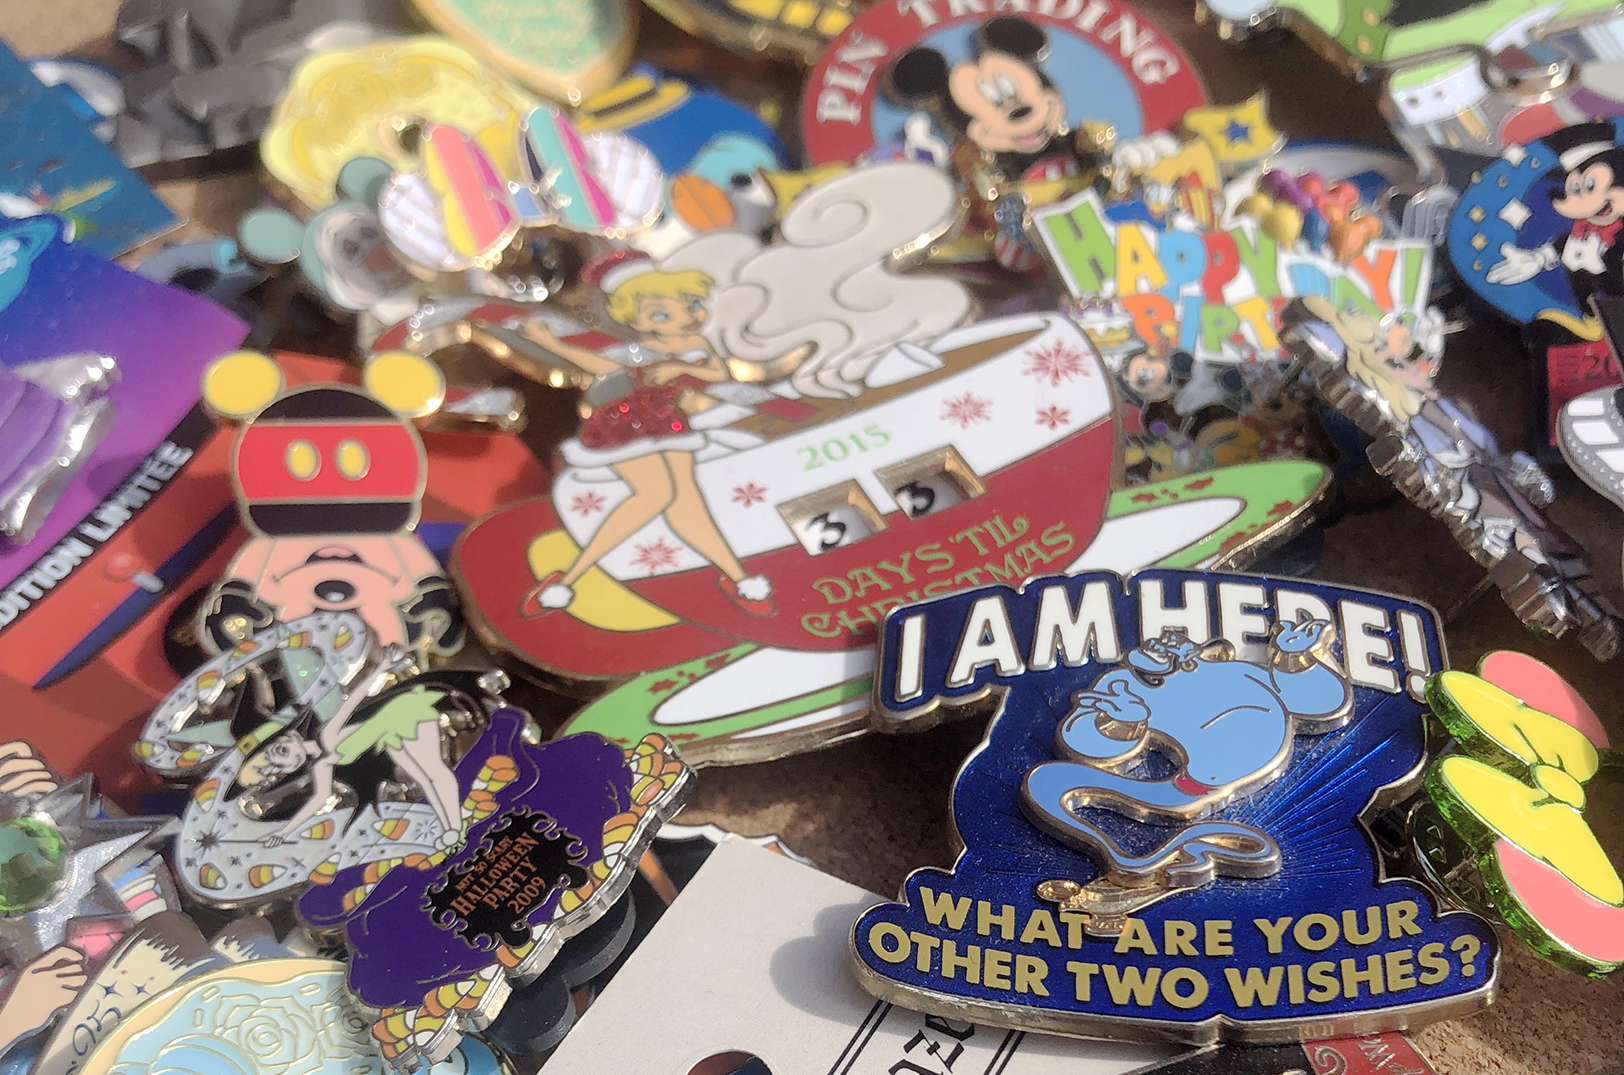 Bippity, boppity boon for Disney pin collectors: Family uses tech expertise to build trinket trading platform